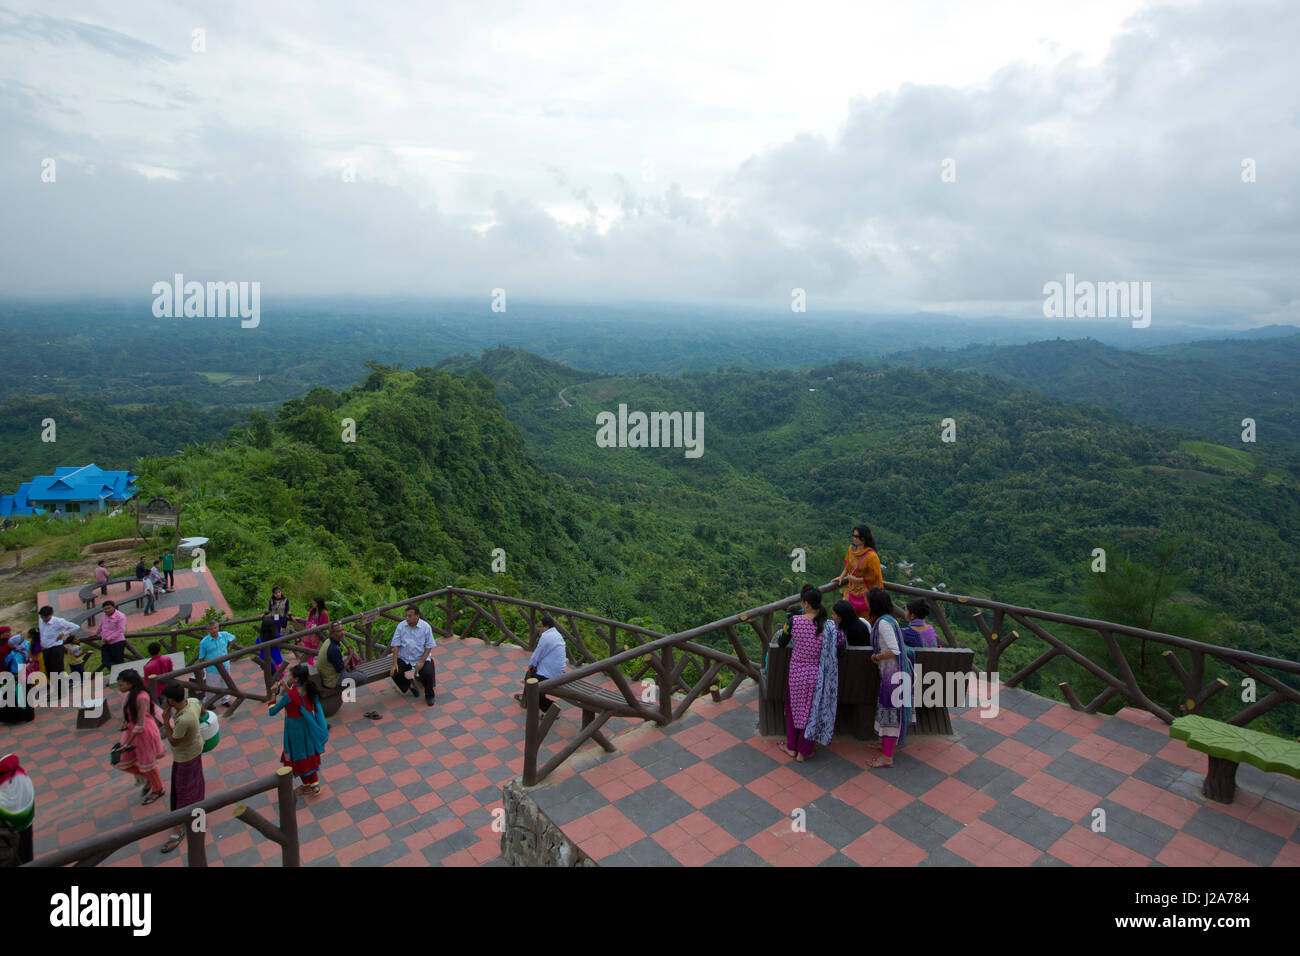 Tourists at the Nilachal Escape Resort on the top of the Nilachal hill at Bandarban, Bangladesh. Stock Photo